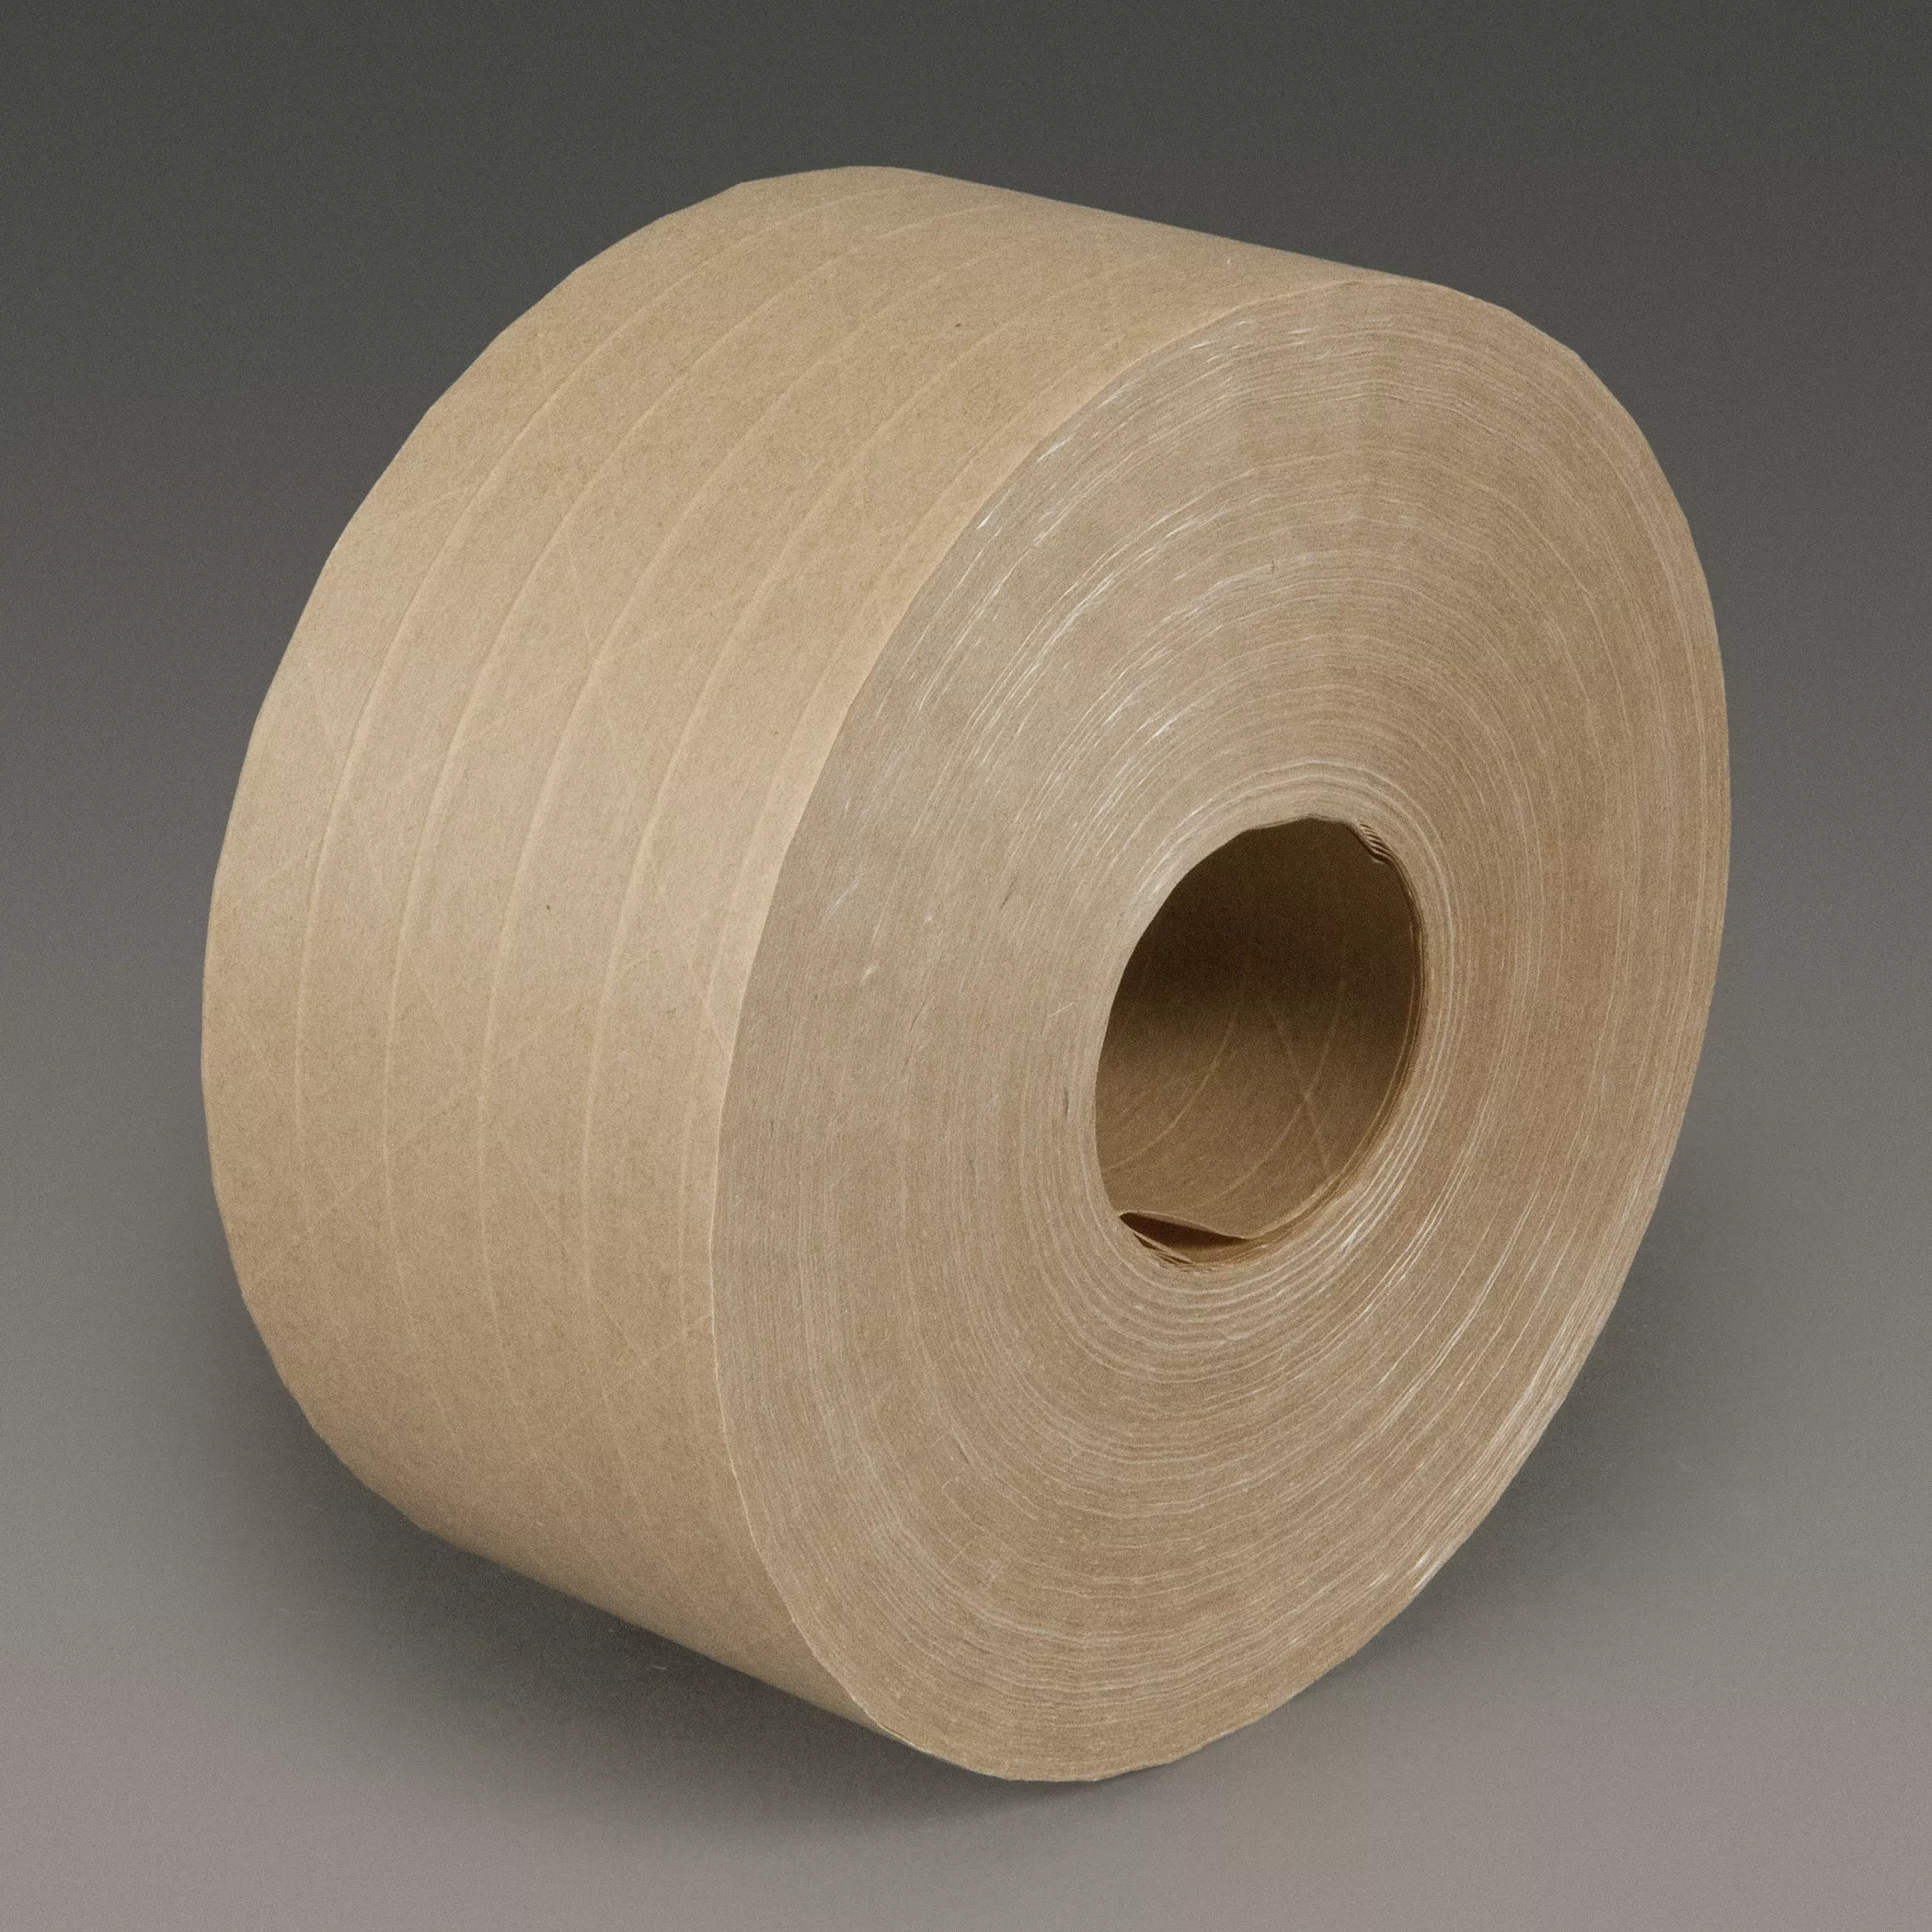 3M™ Water Activated Paper Tape 6146, Natural, Medium Duty Reinforced, 72
mm x 450 ft, 10/Case